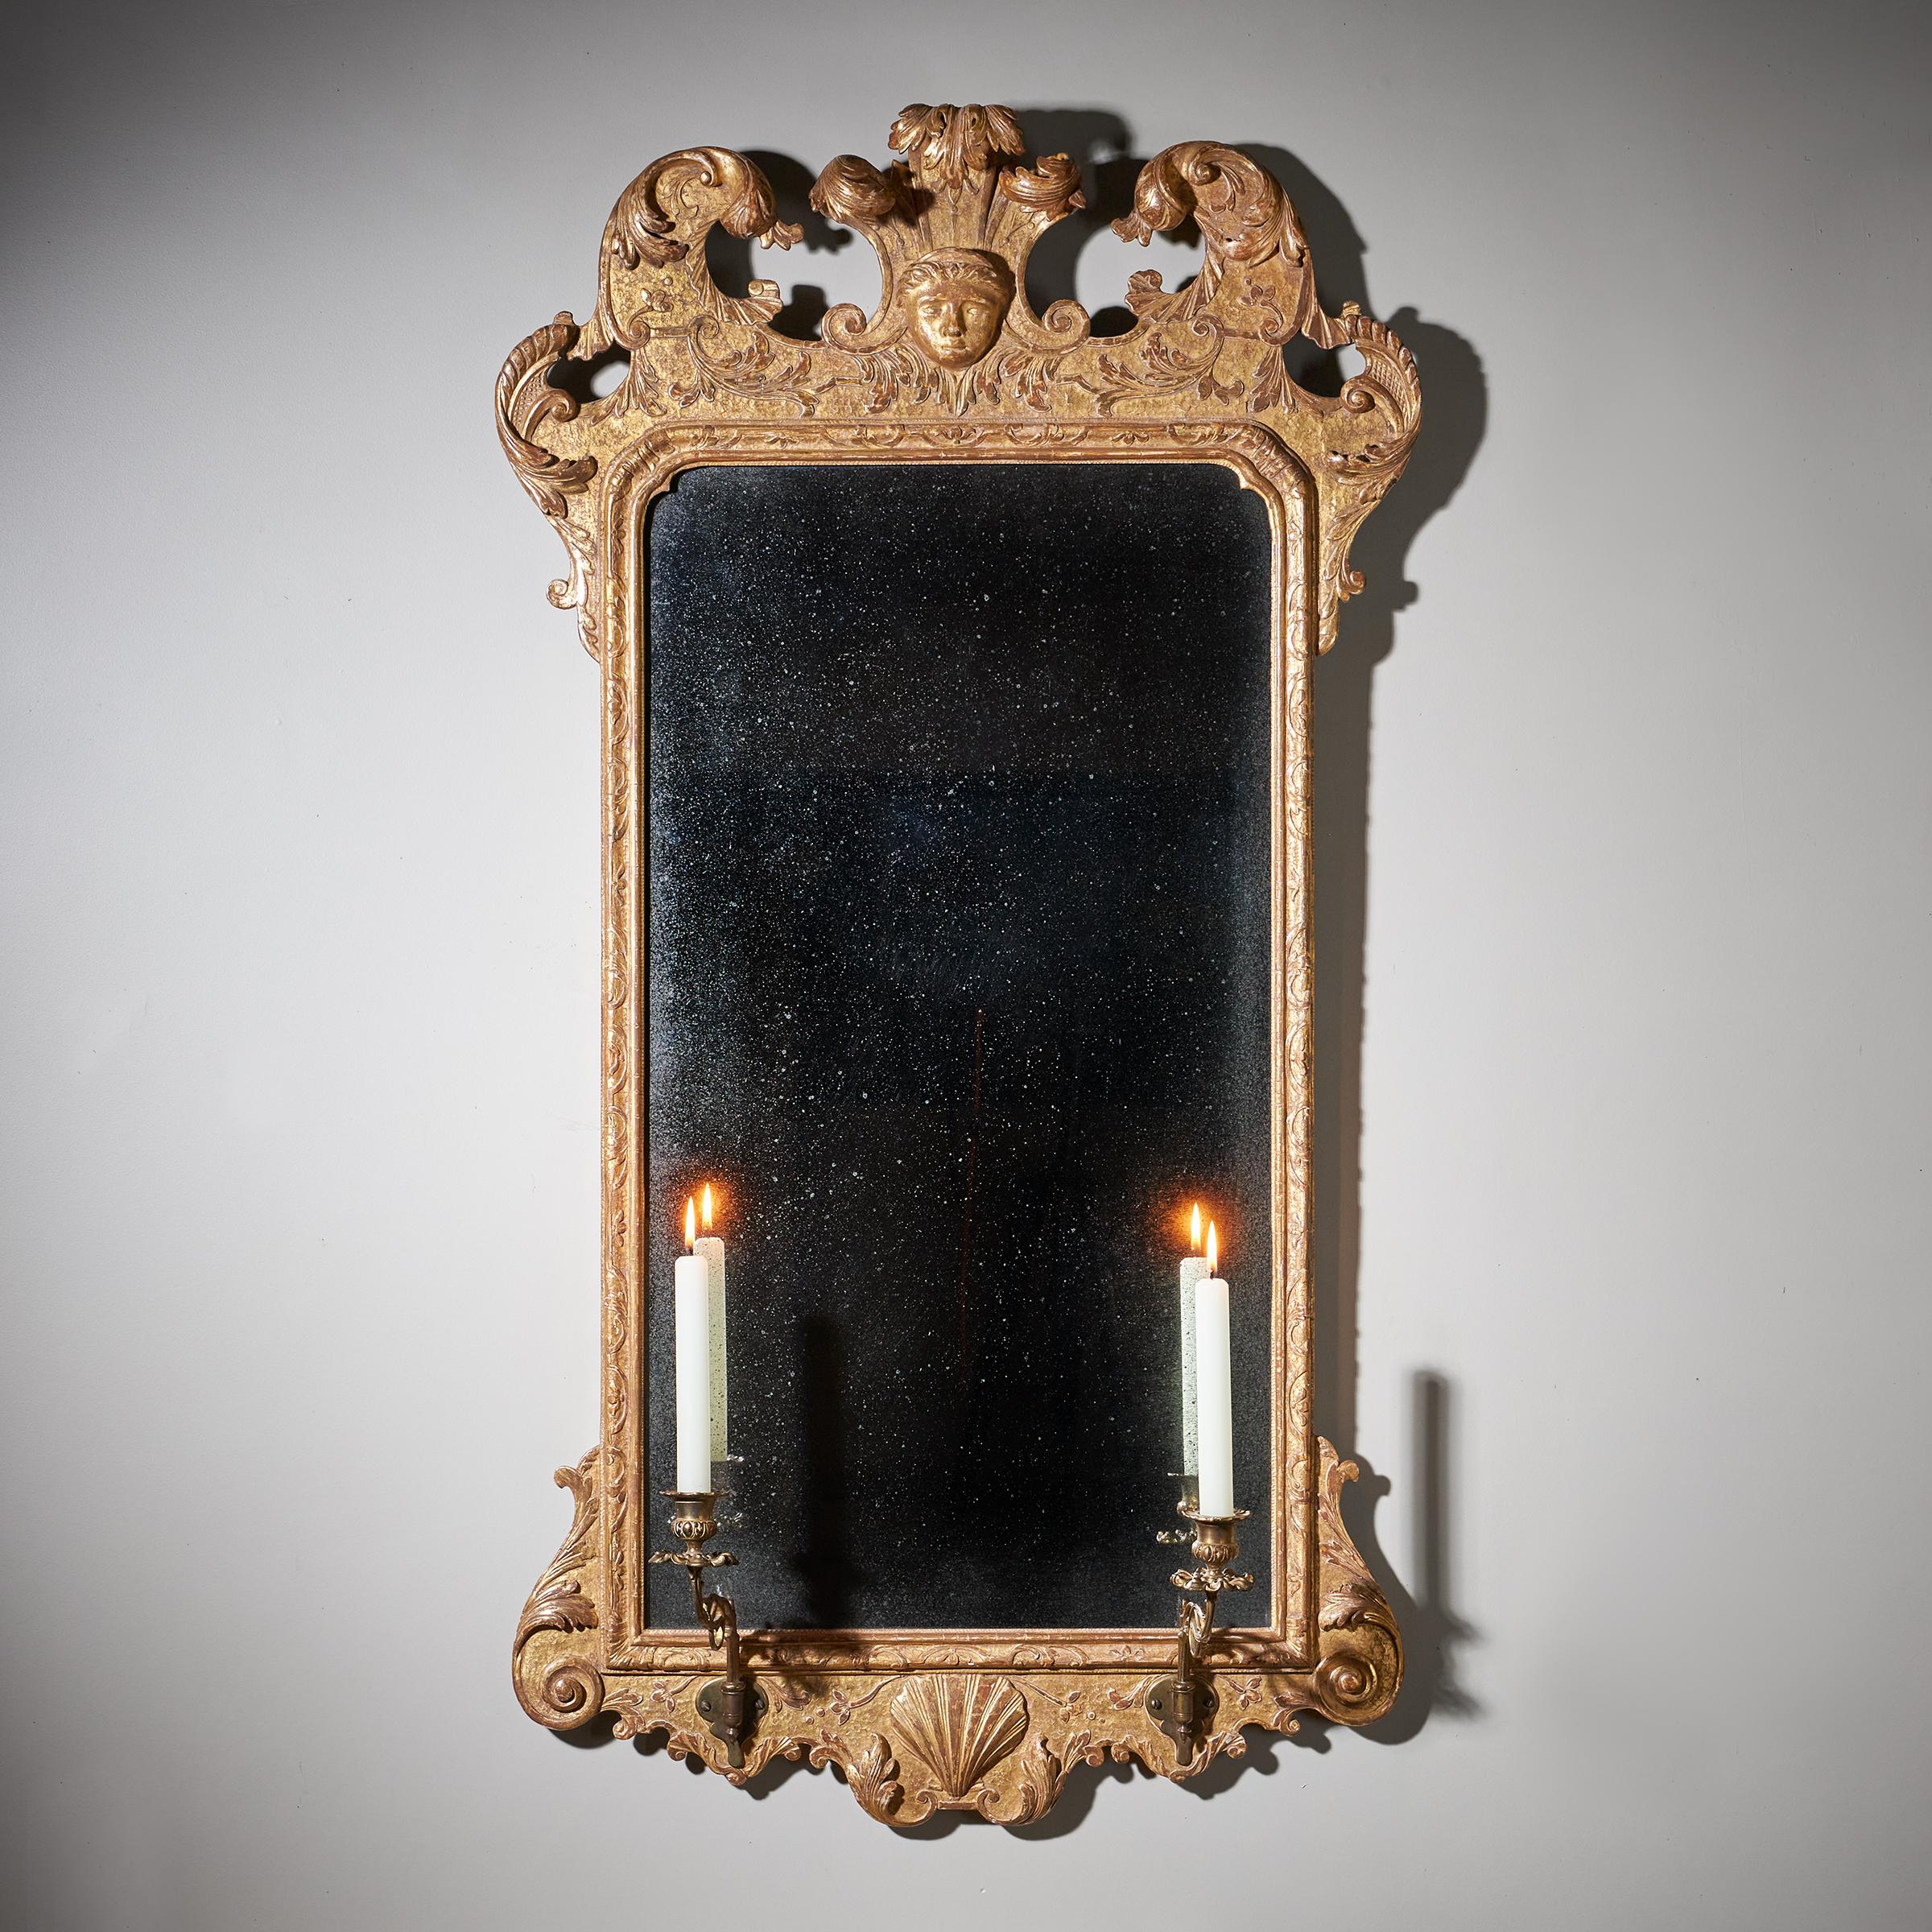 A fine and rare early 18th century George I Gilt Gesso pier or console mirror. 

In the manner of John Belchier

The shaped bevelled mirror plate sits within an upright rectangular moulded frame decorated with Fine leaf carving, lobed corners